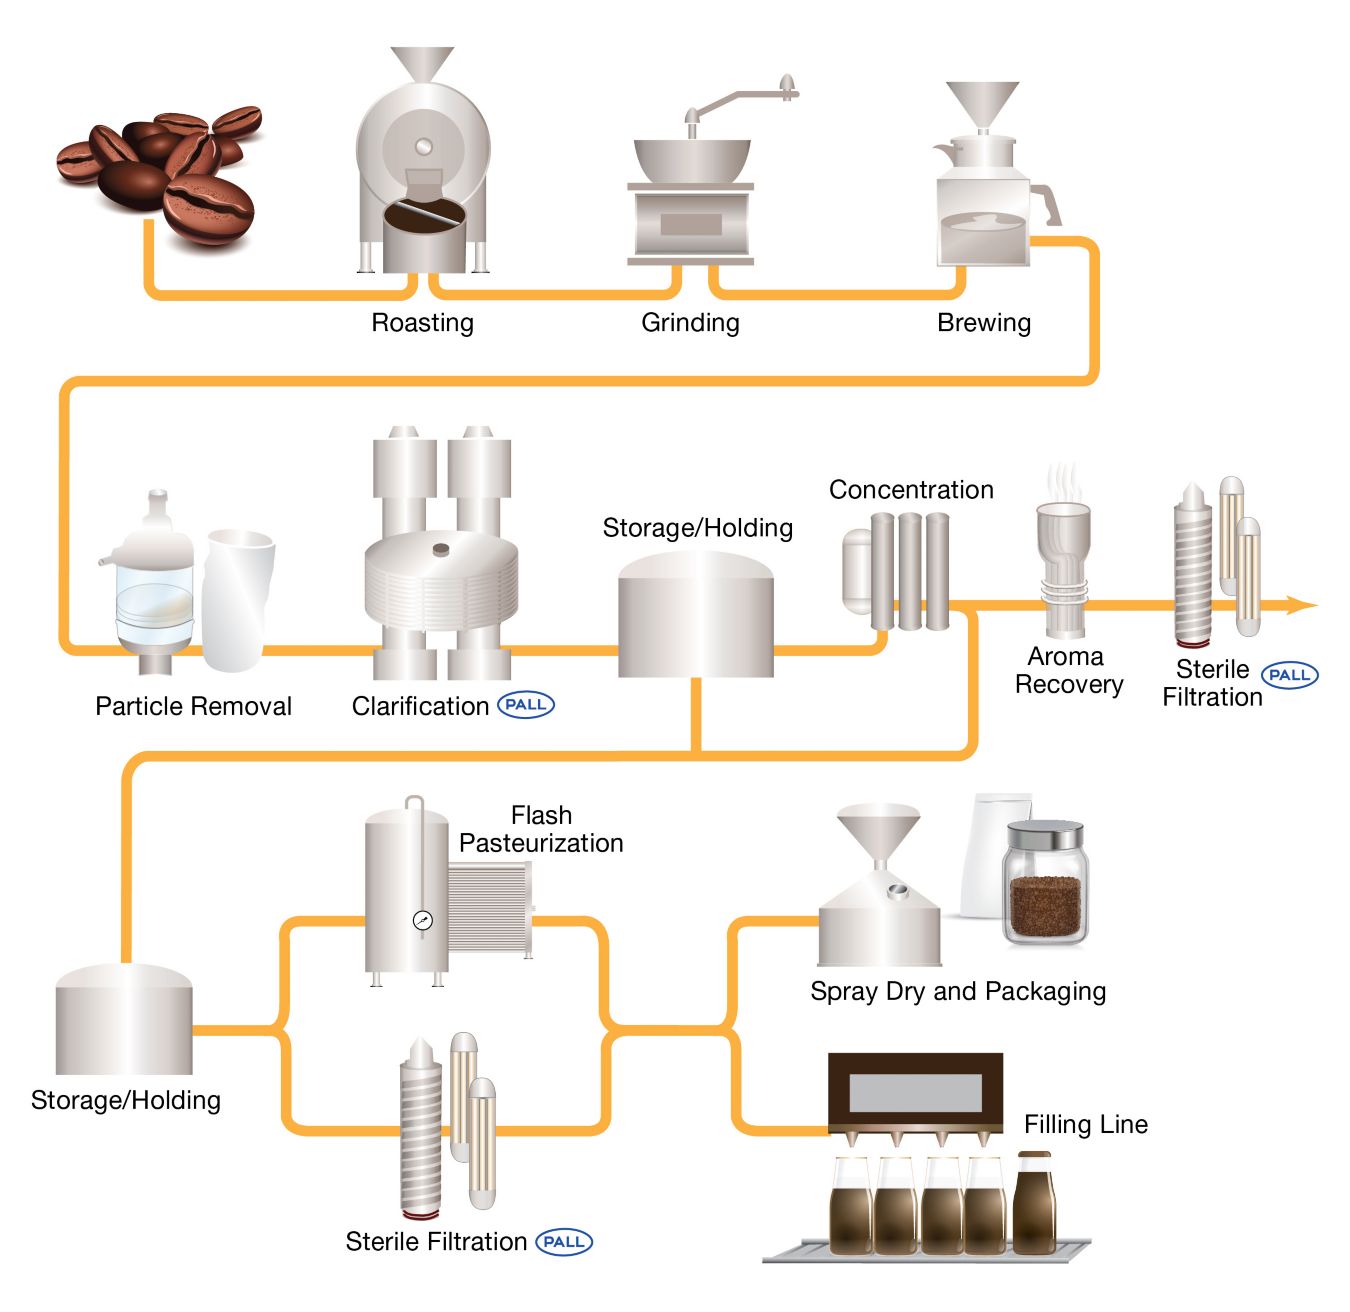 https://pall.scene7.com/is/image/pallcorporation/cold-brew-coffee-process-flow-rev0121?$OptimizedPNG$